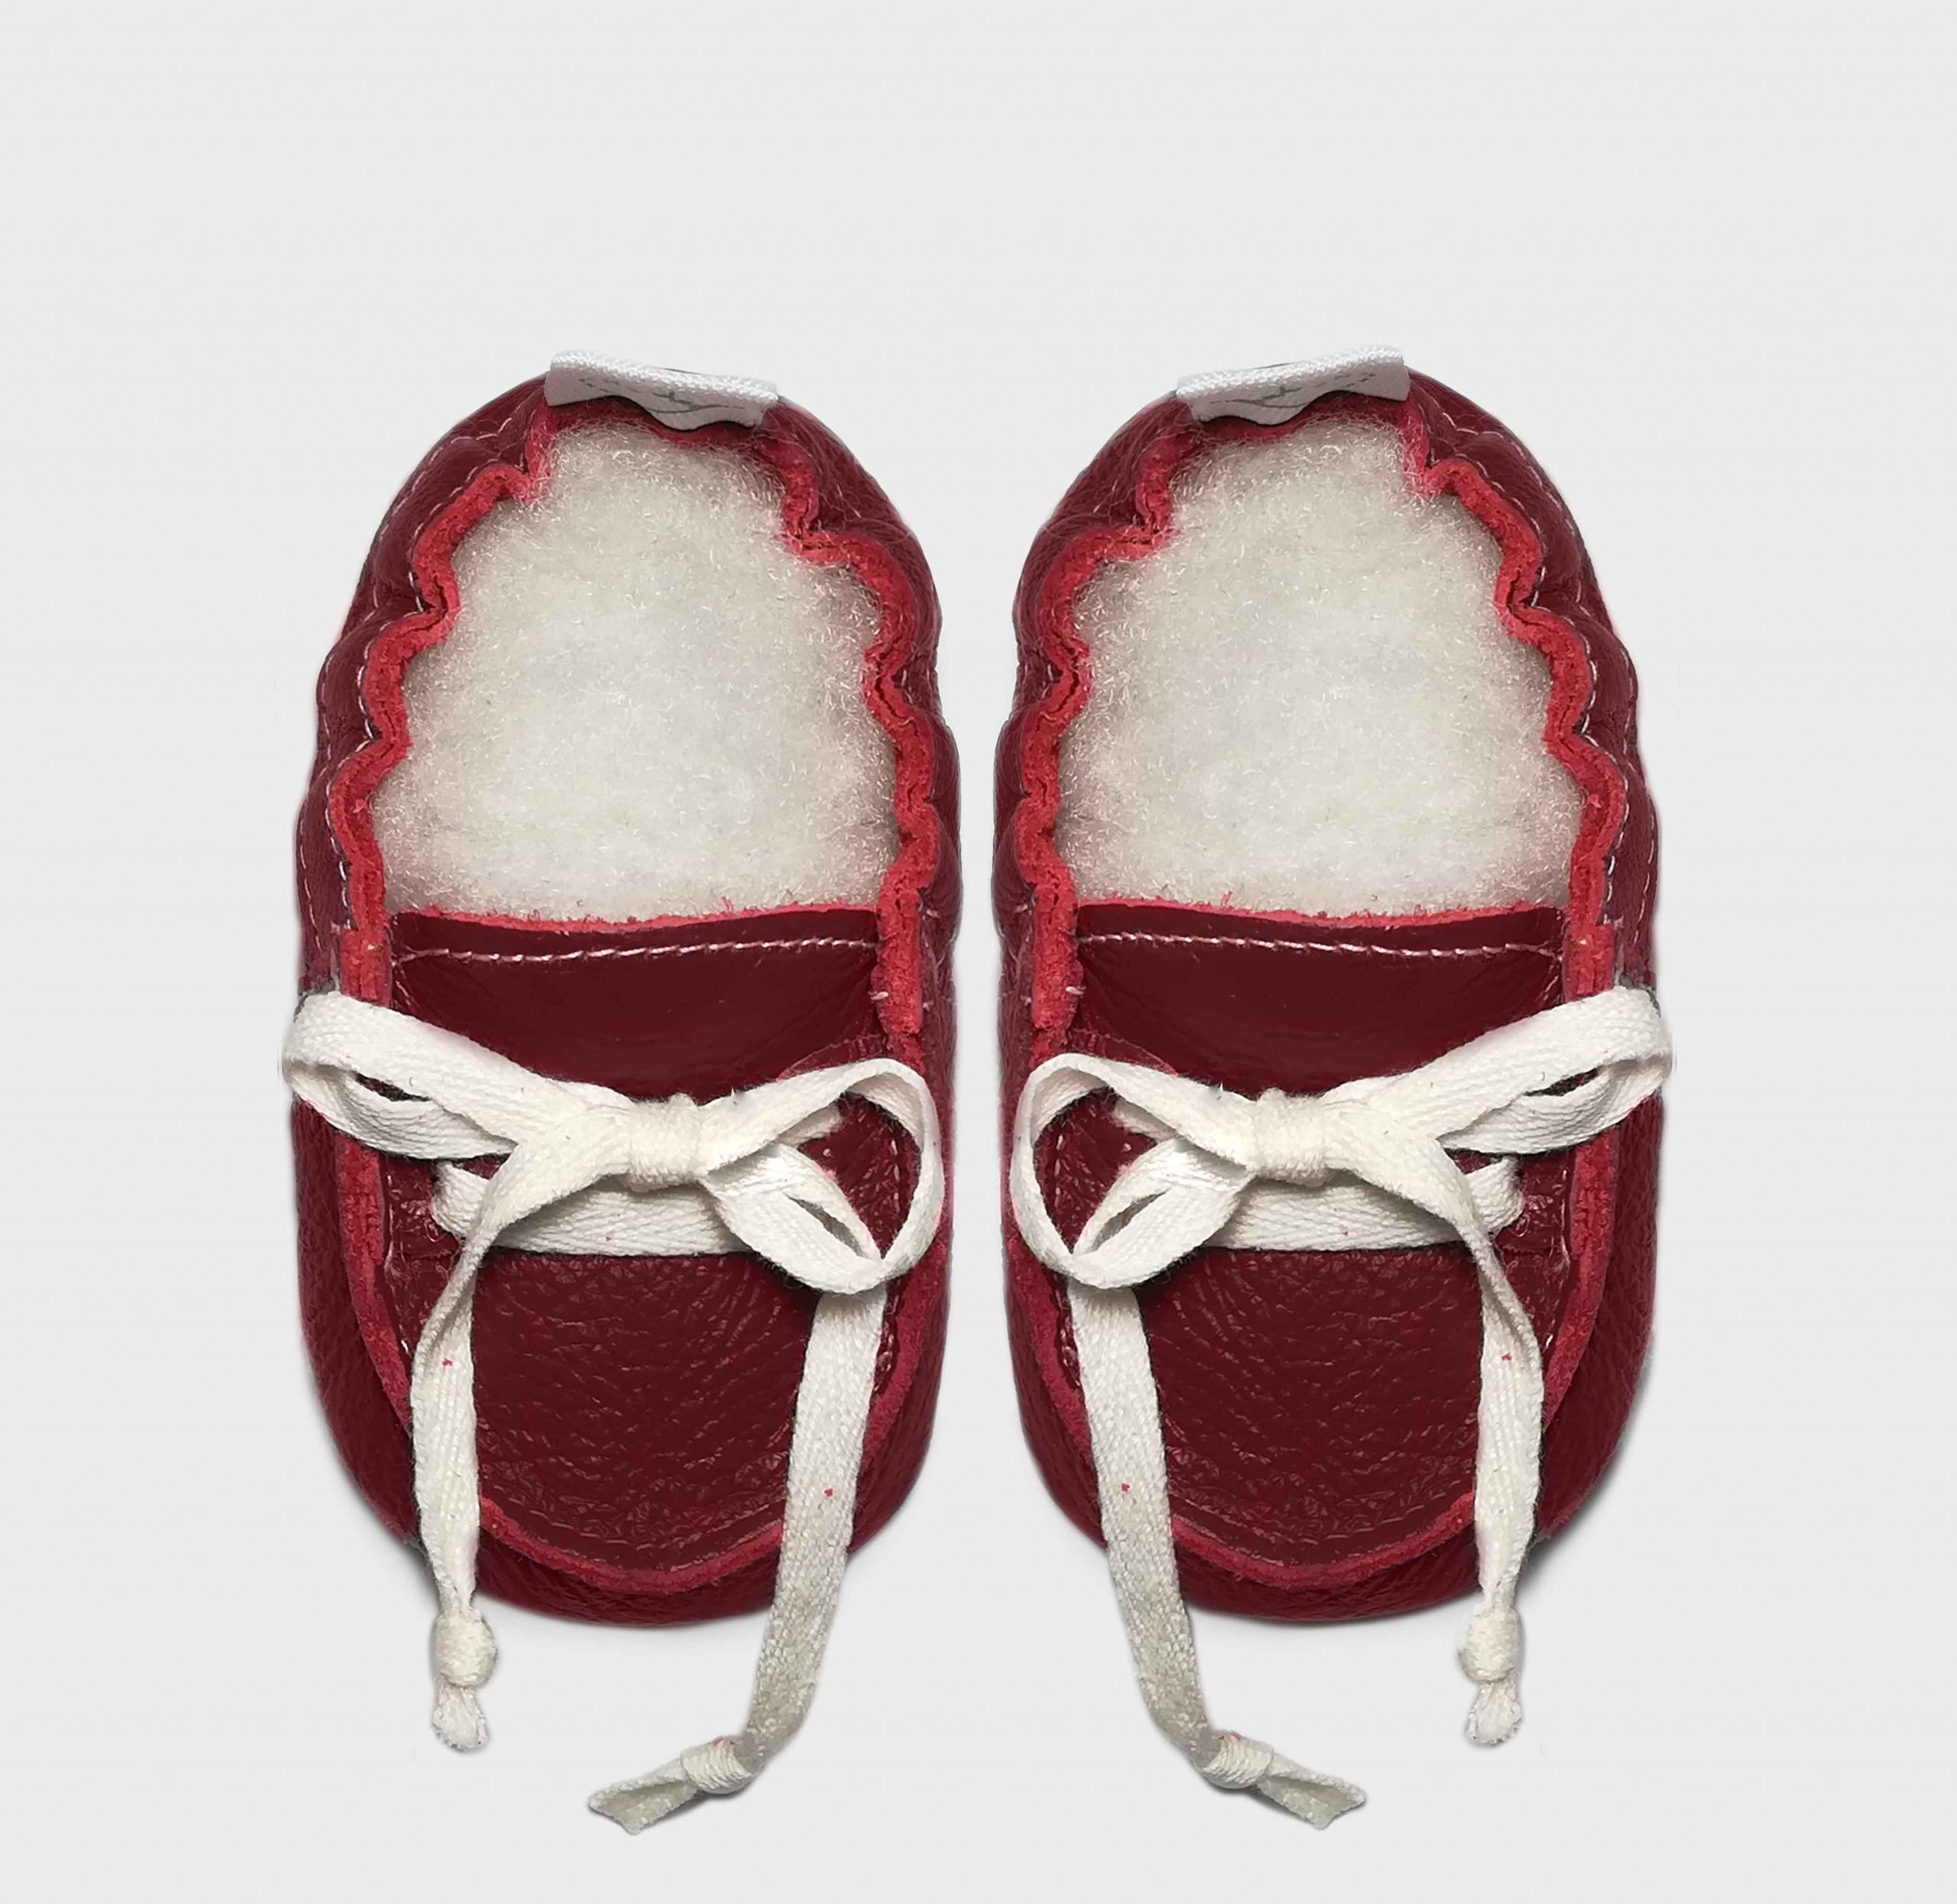 Pitta-Patta Red Boat Shoe - Leather Slippers For Kiddies